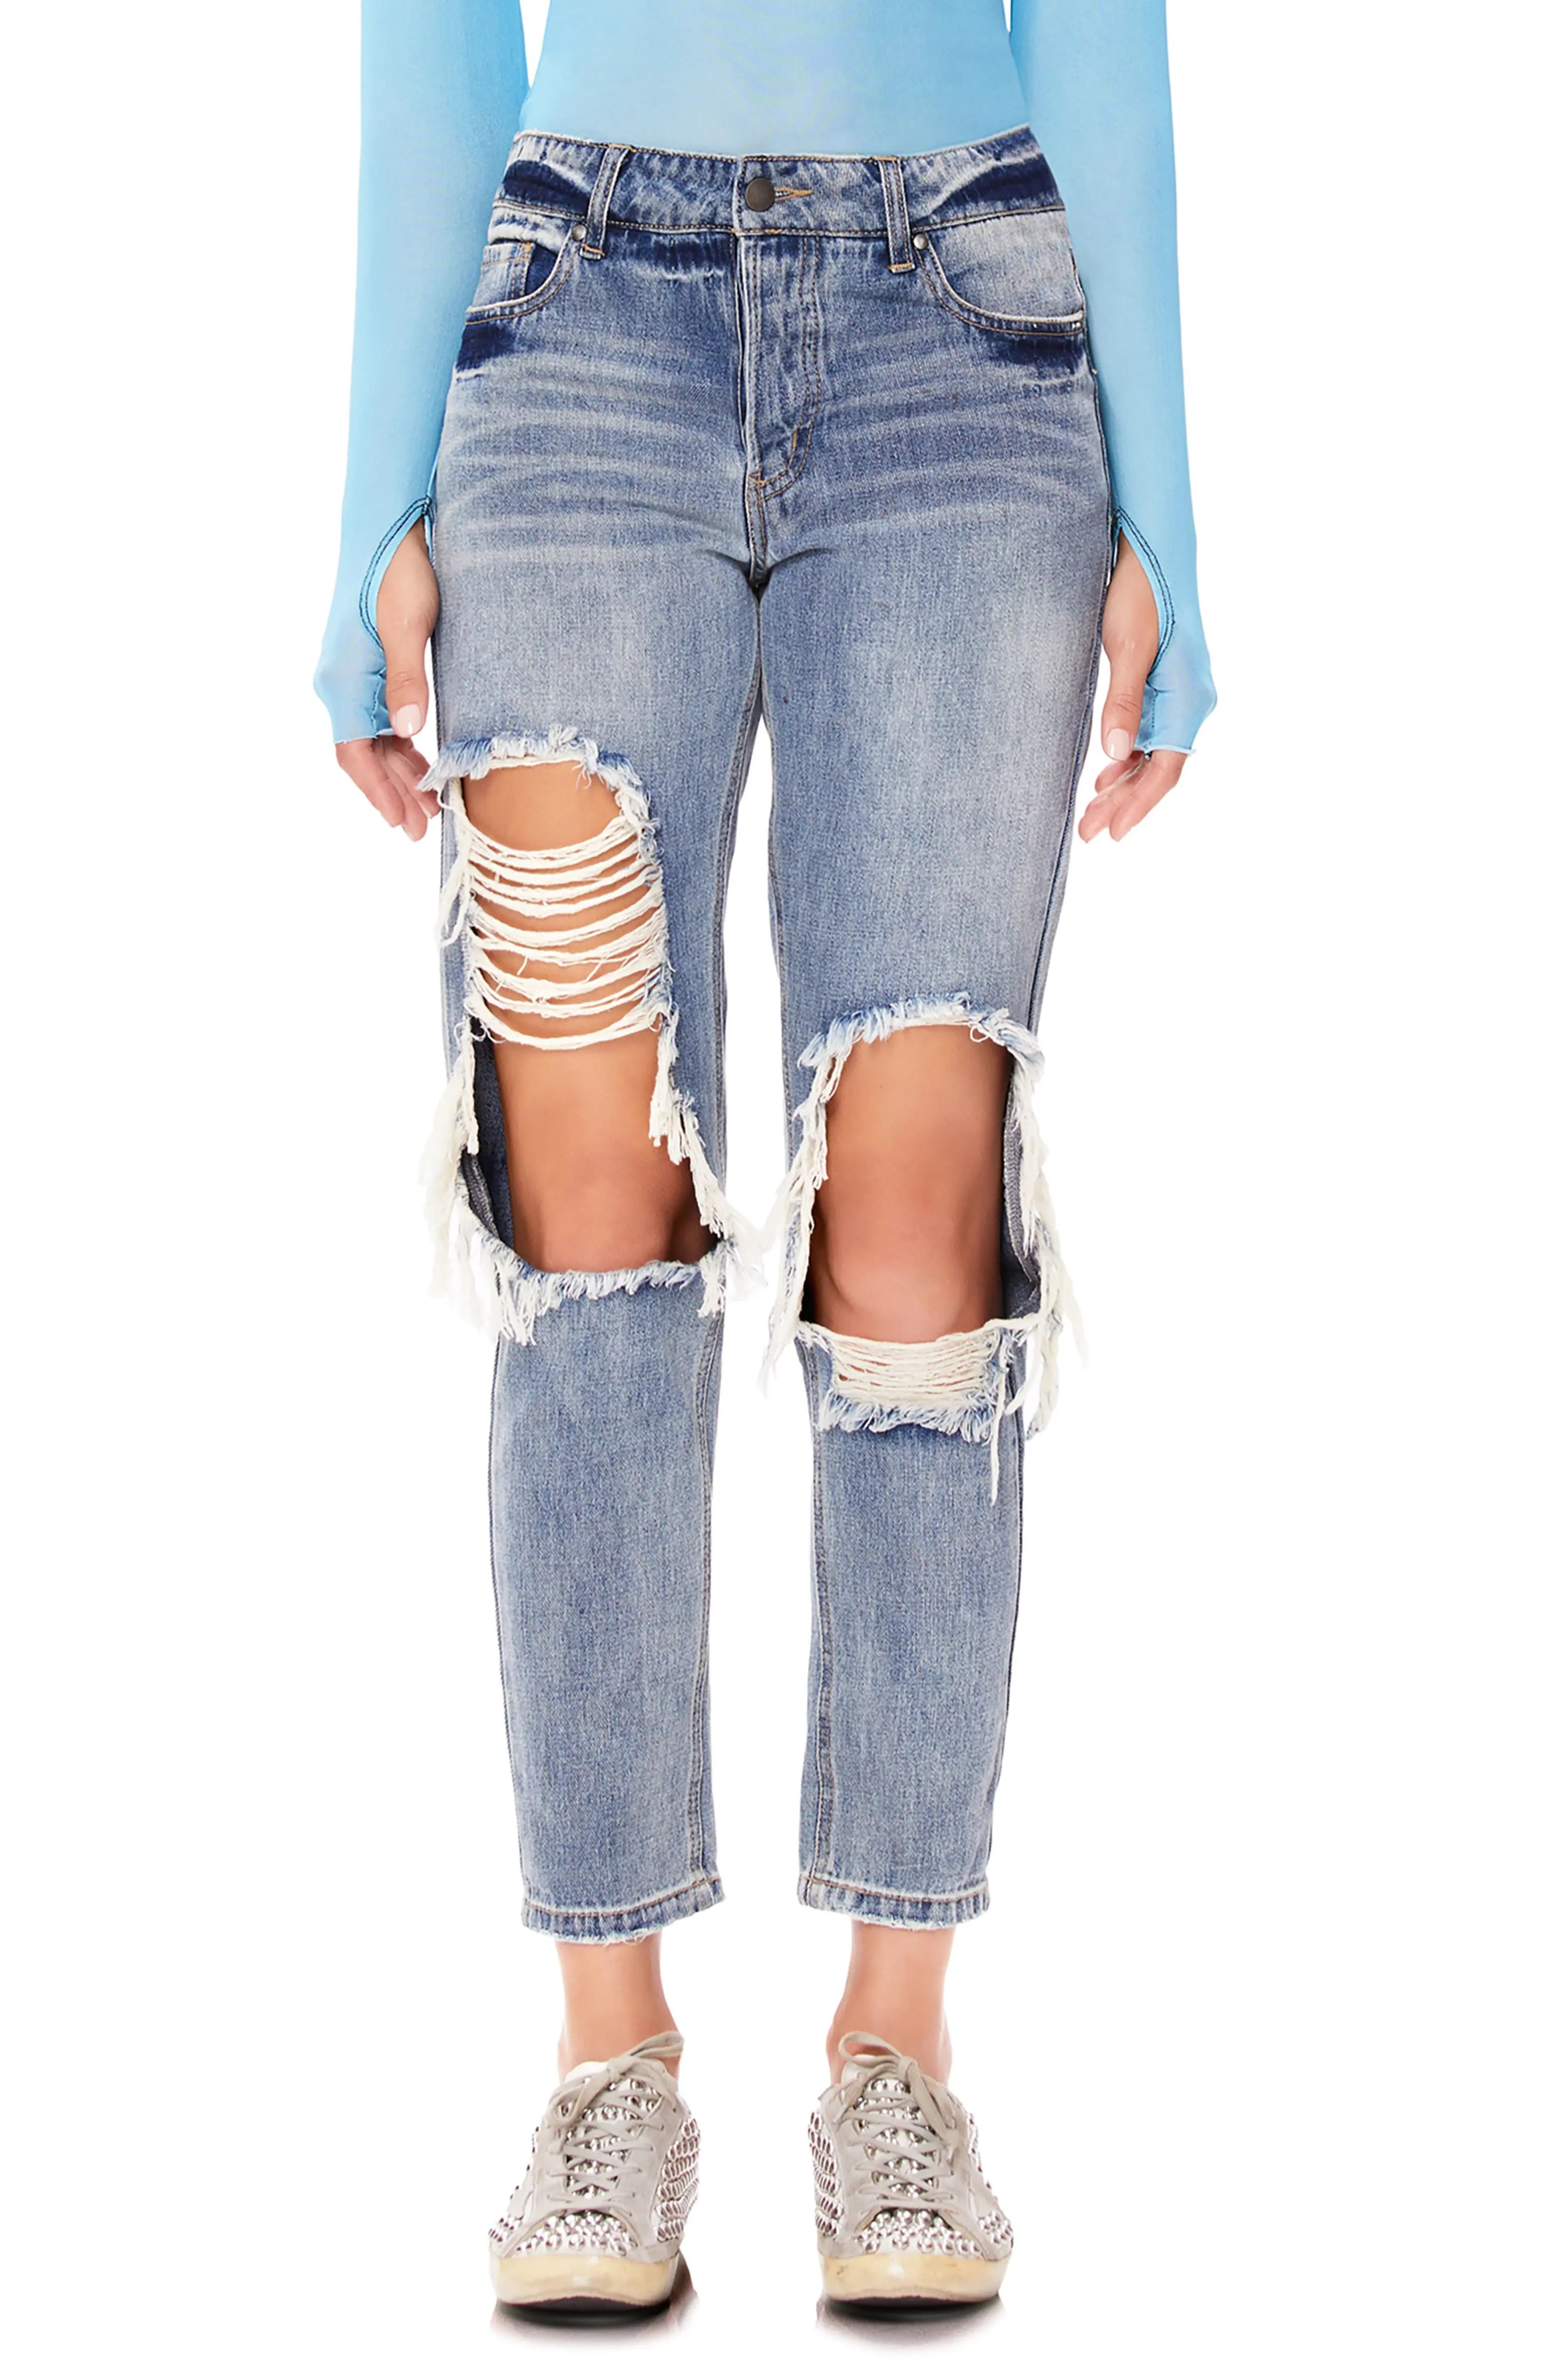 Cyrus High Waist Ankle Jeans | Nordstrom